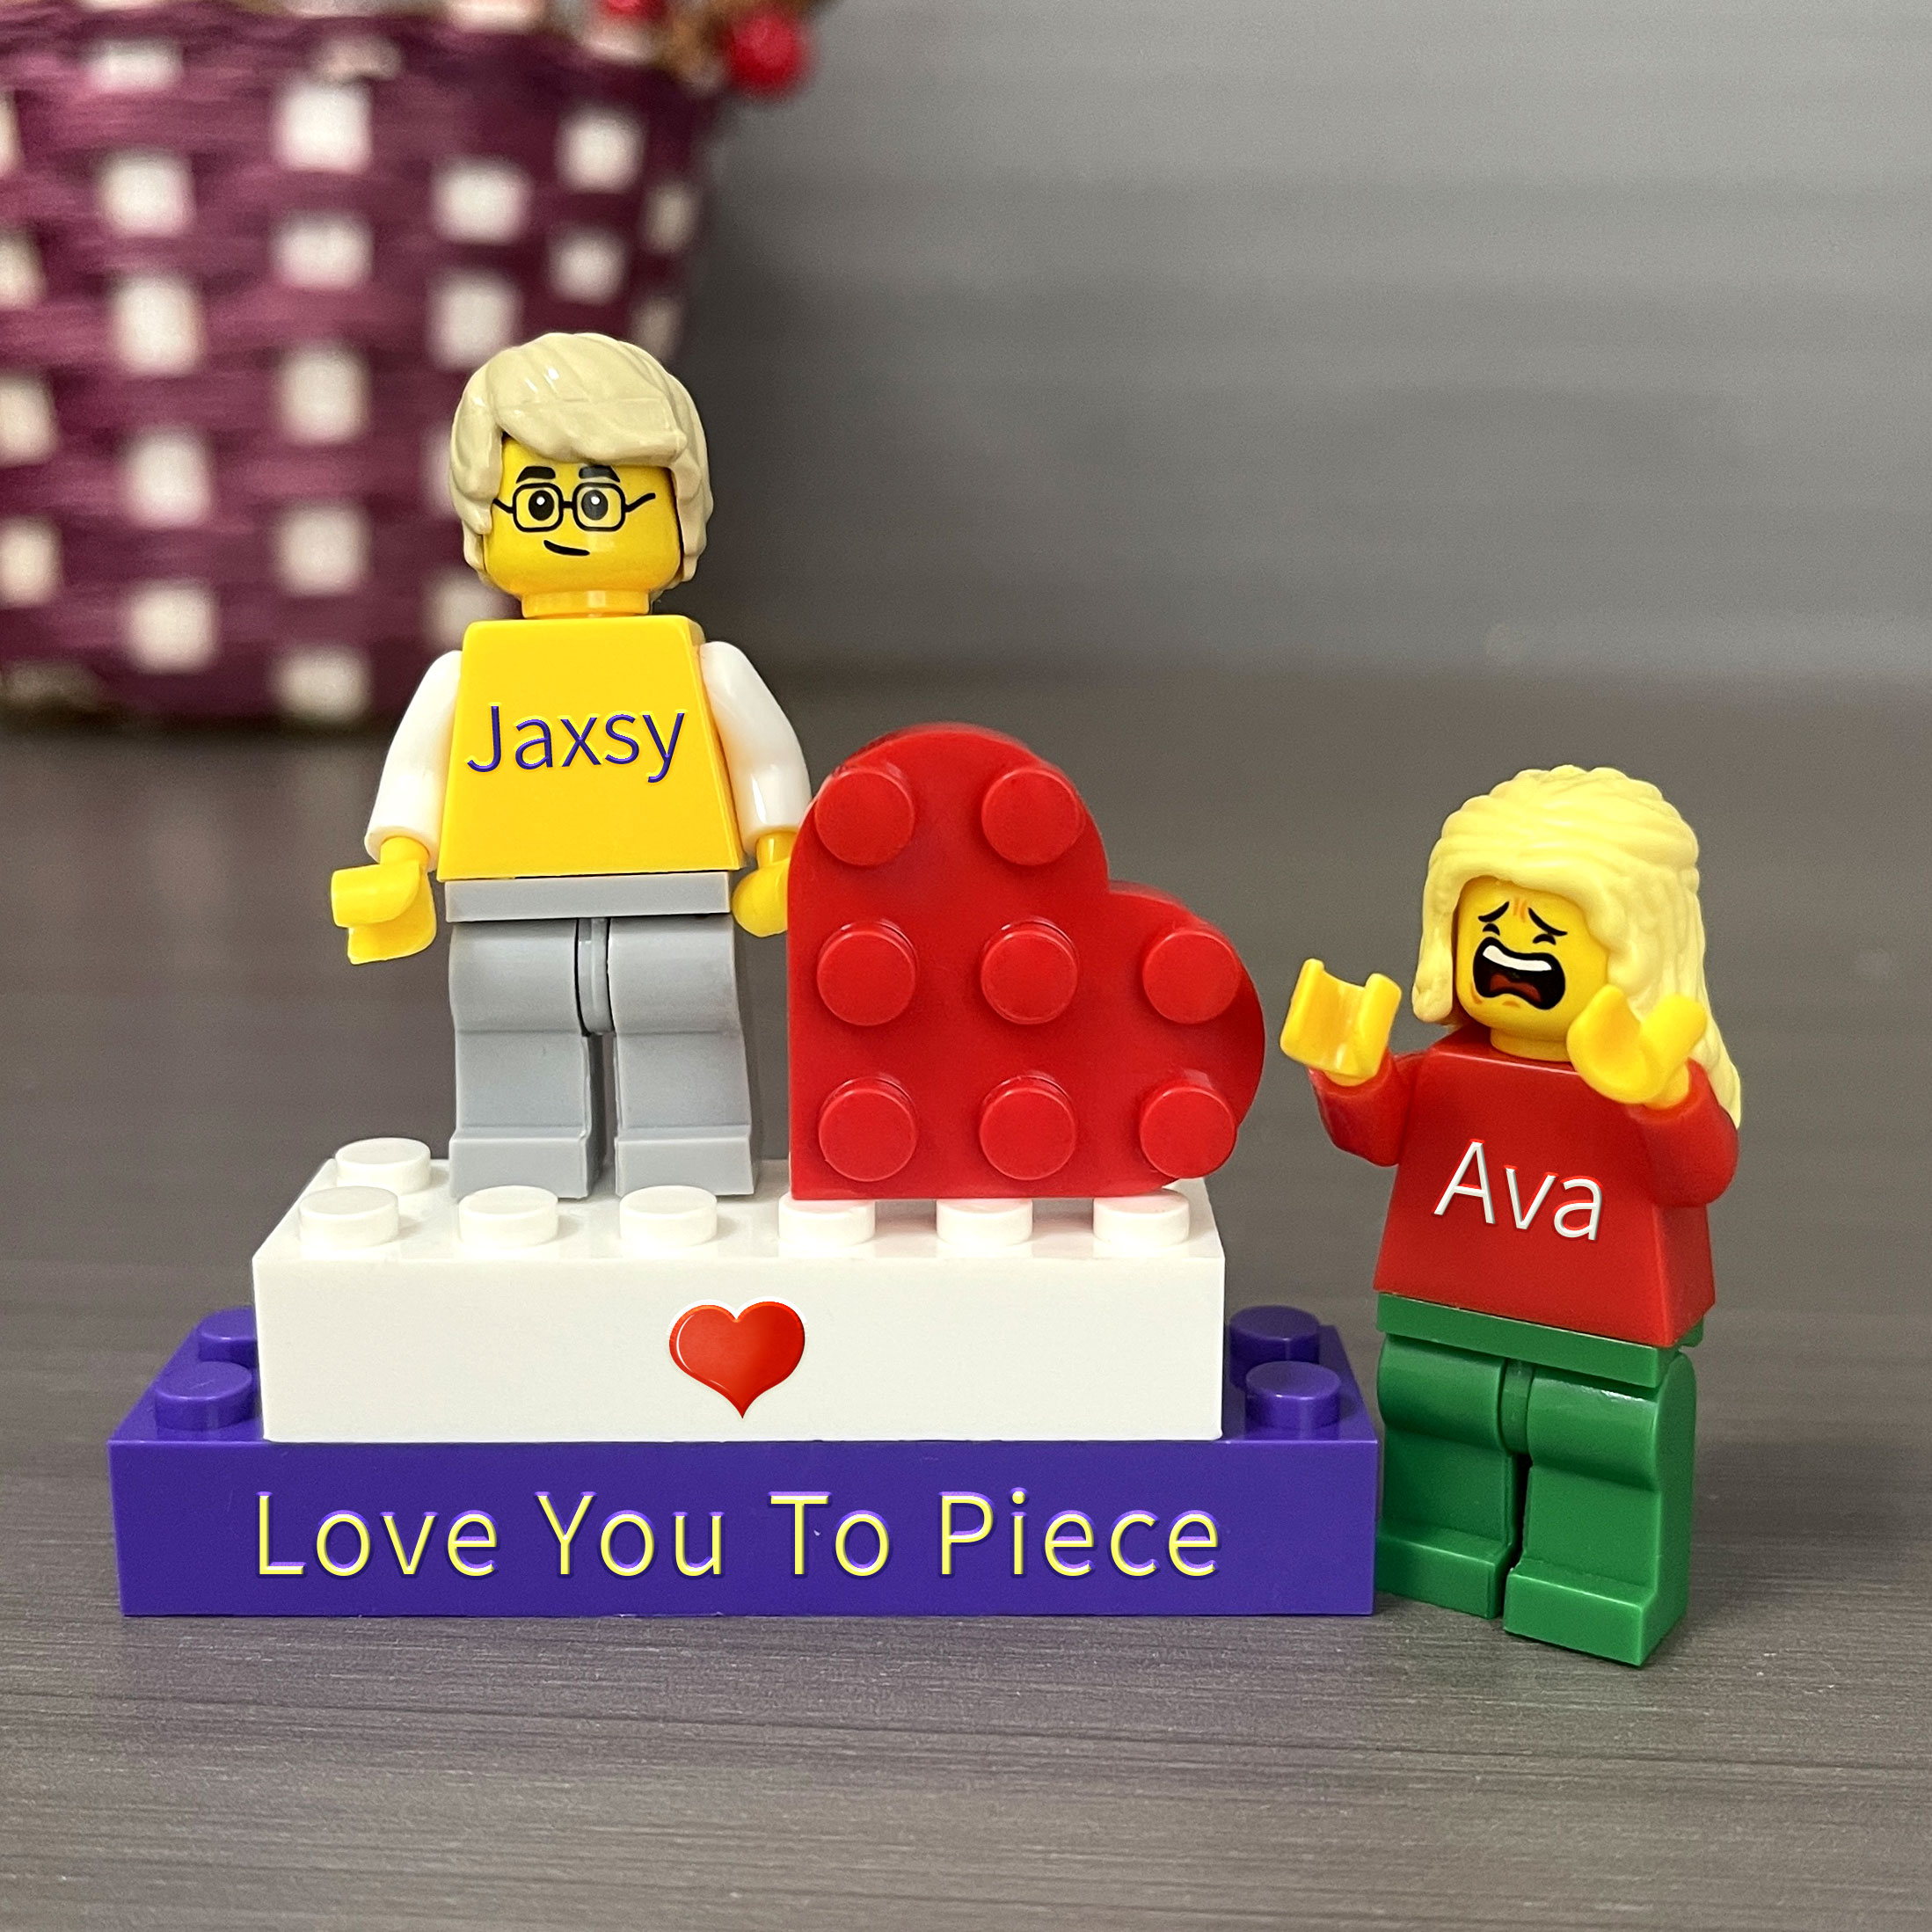 Love You To Piece  Personalized Figures on Personalized Brick With Love/Pets For Happy Valentine's Day Merry Christmas